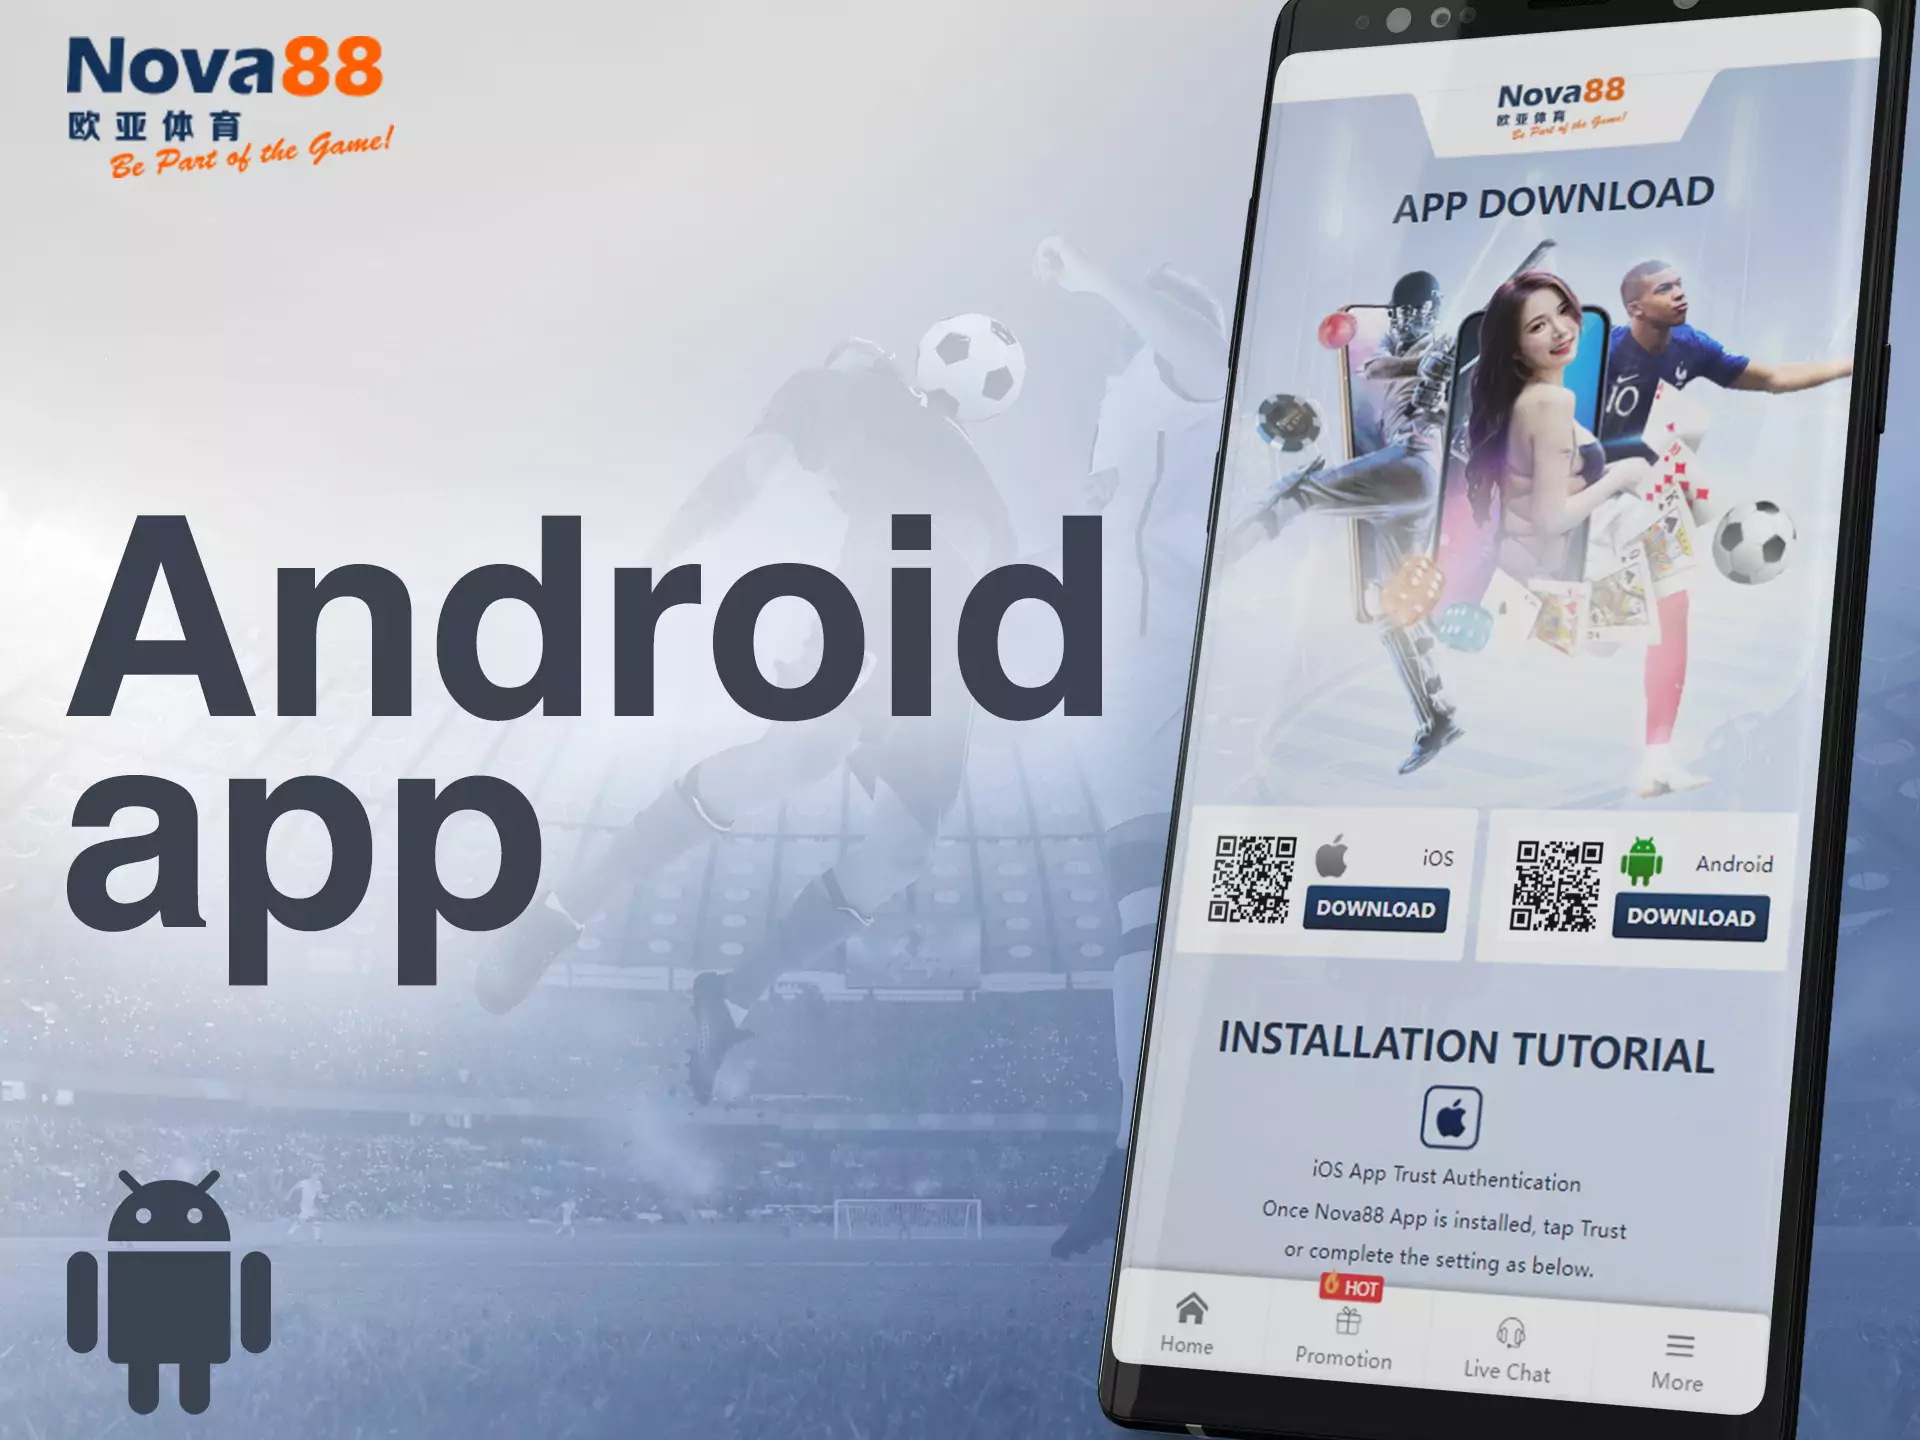 For starting betting from a smartphone, download the Android app of Nova88.